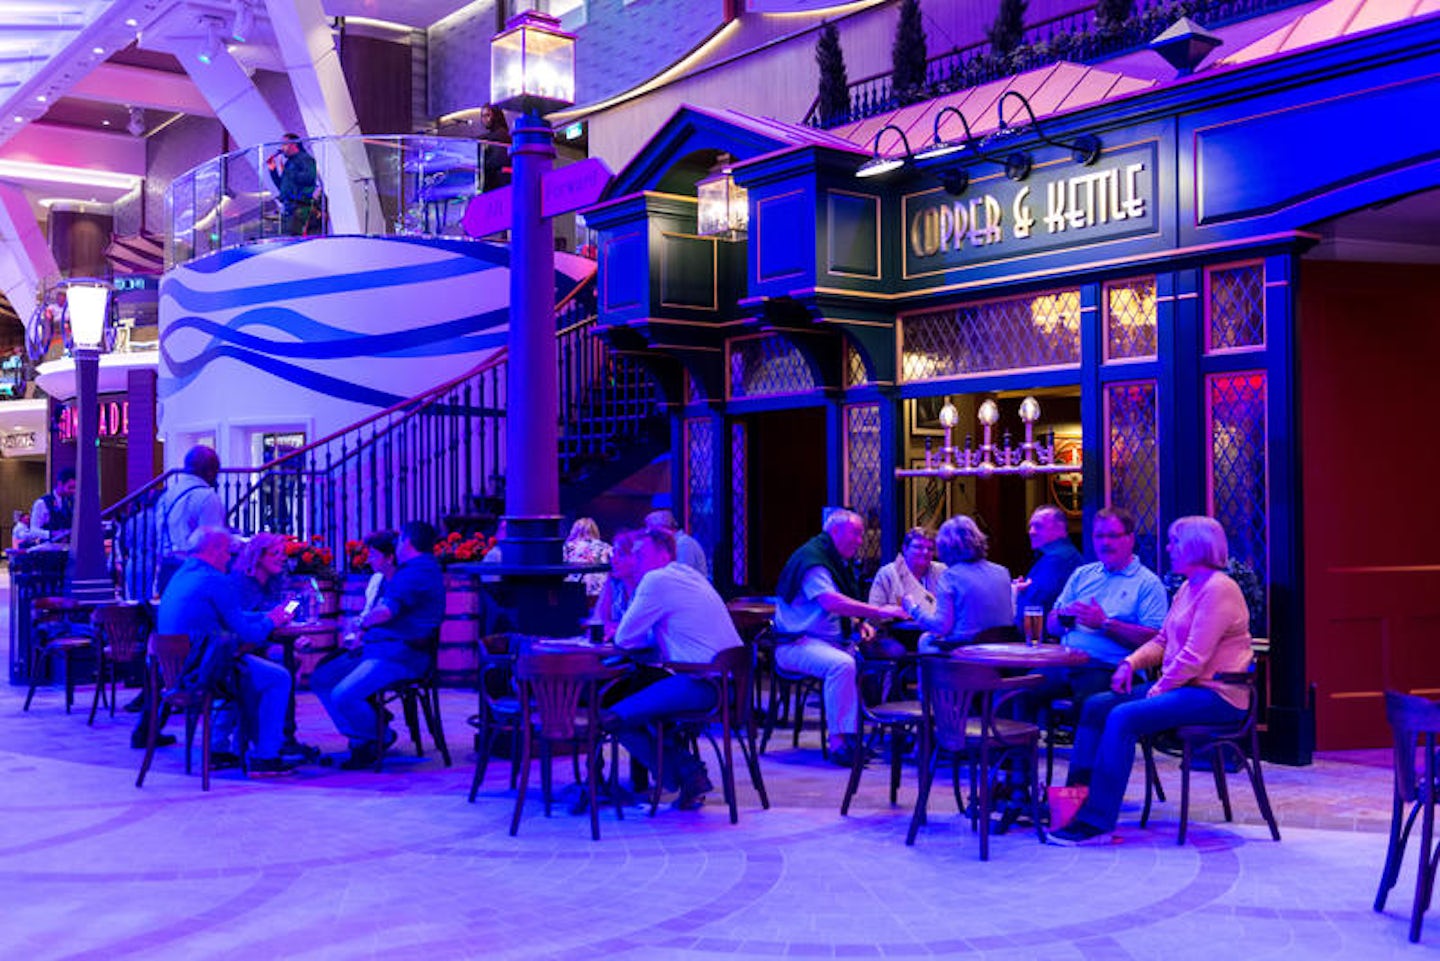 Copper & Kettle Pub on Symphony of the Seas